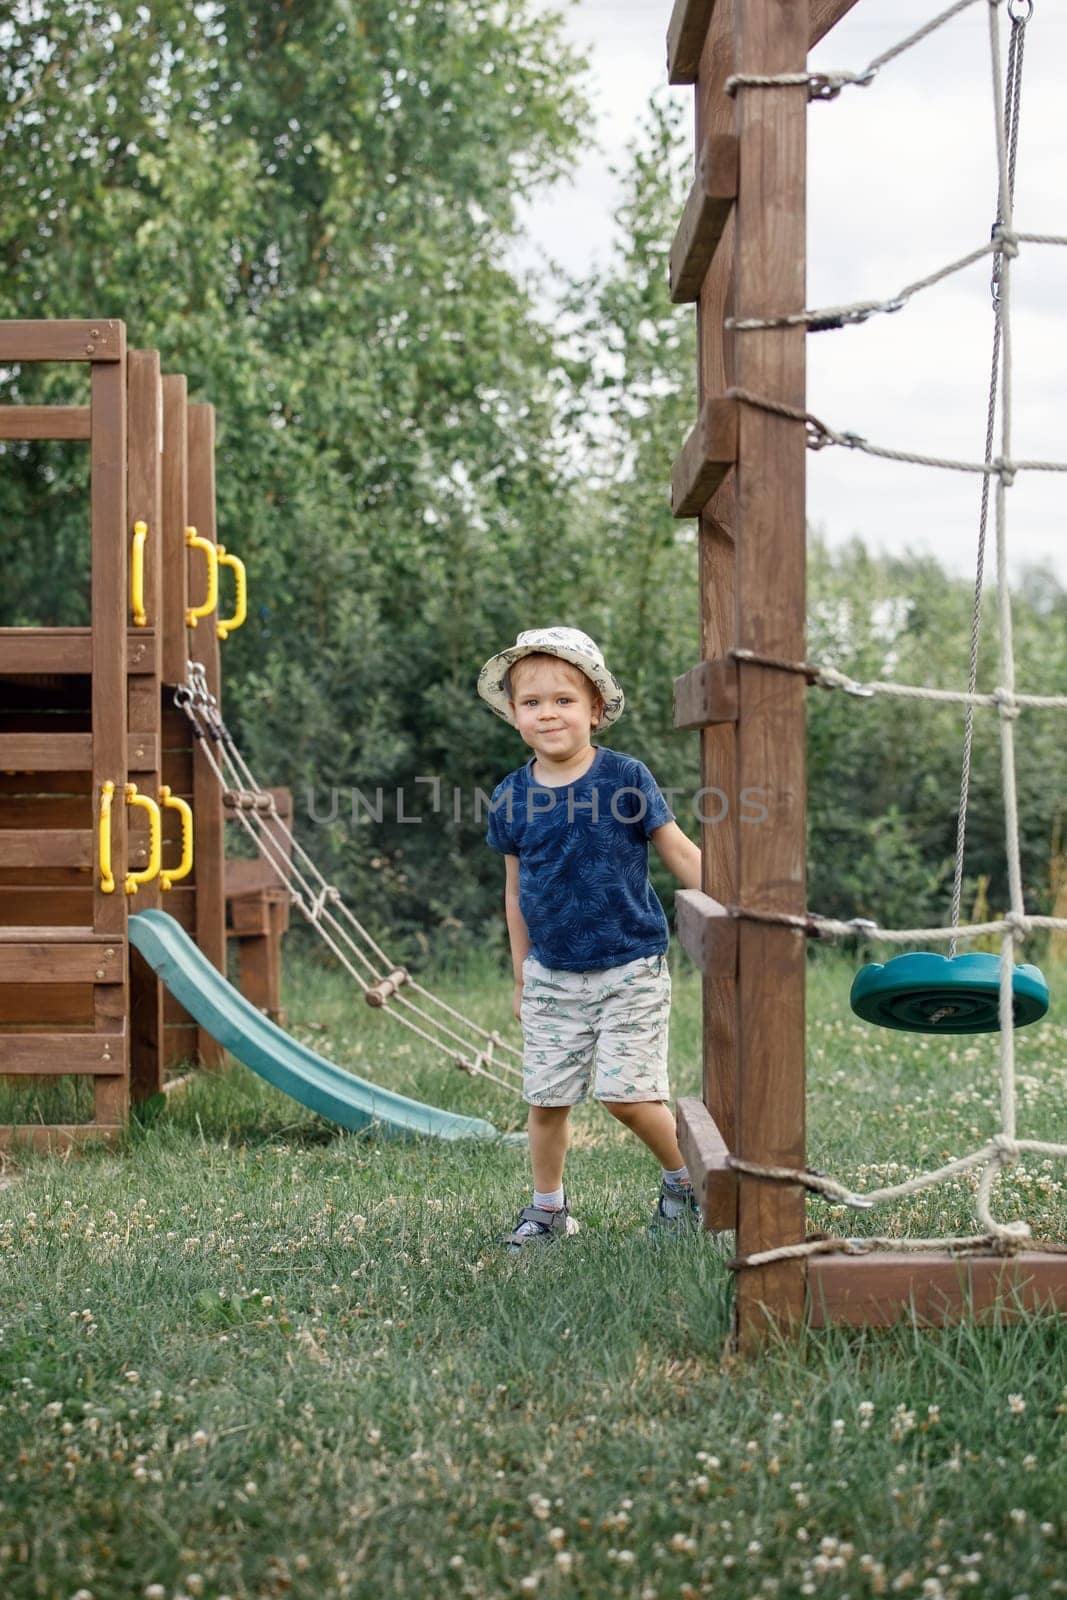 A happy child is running around on his playground on a sunny summer day. Nice day, green nature garden, boy playing happily.